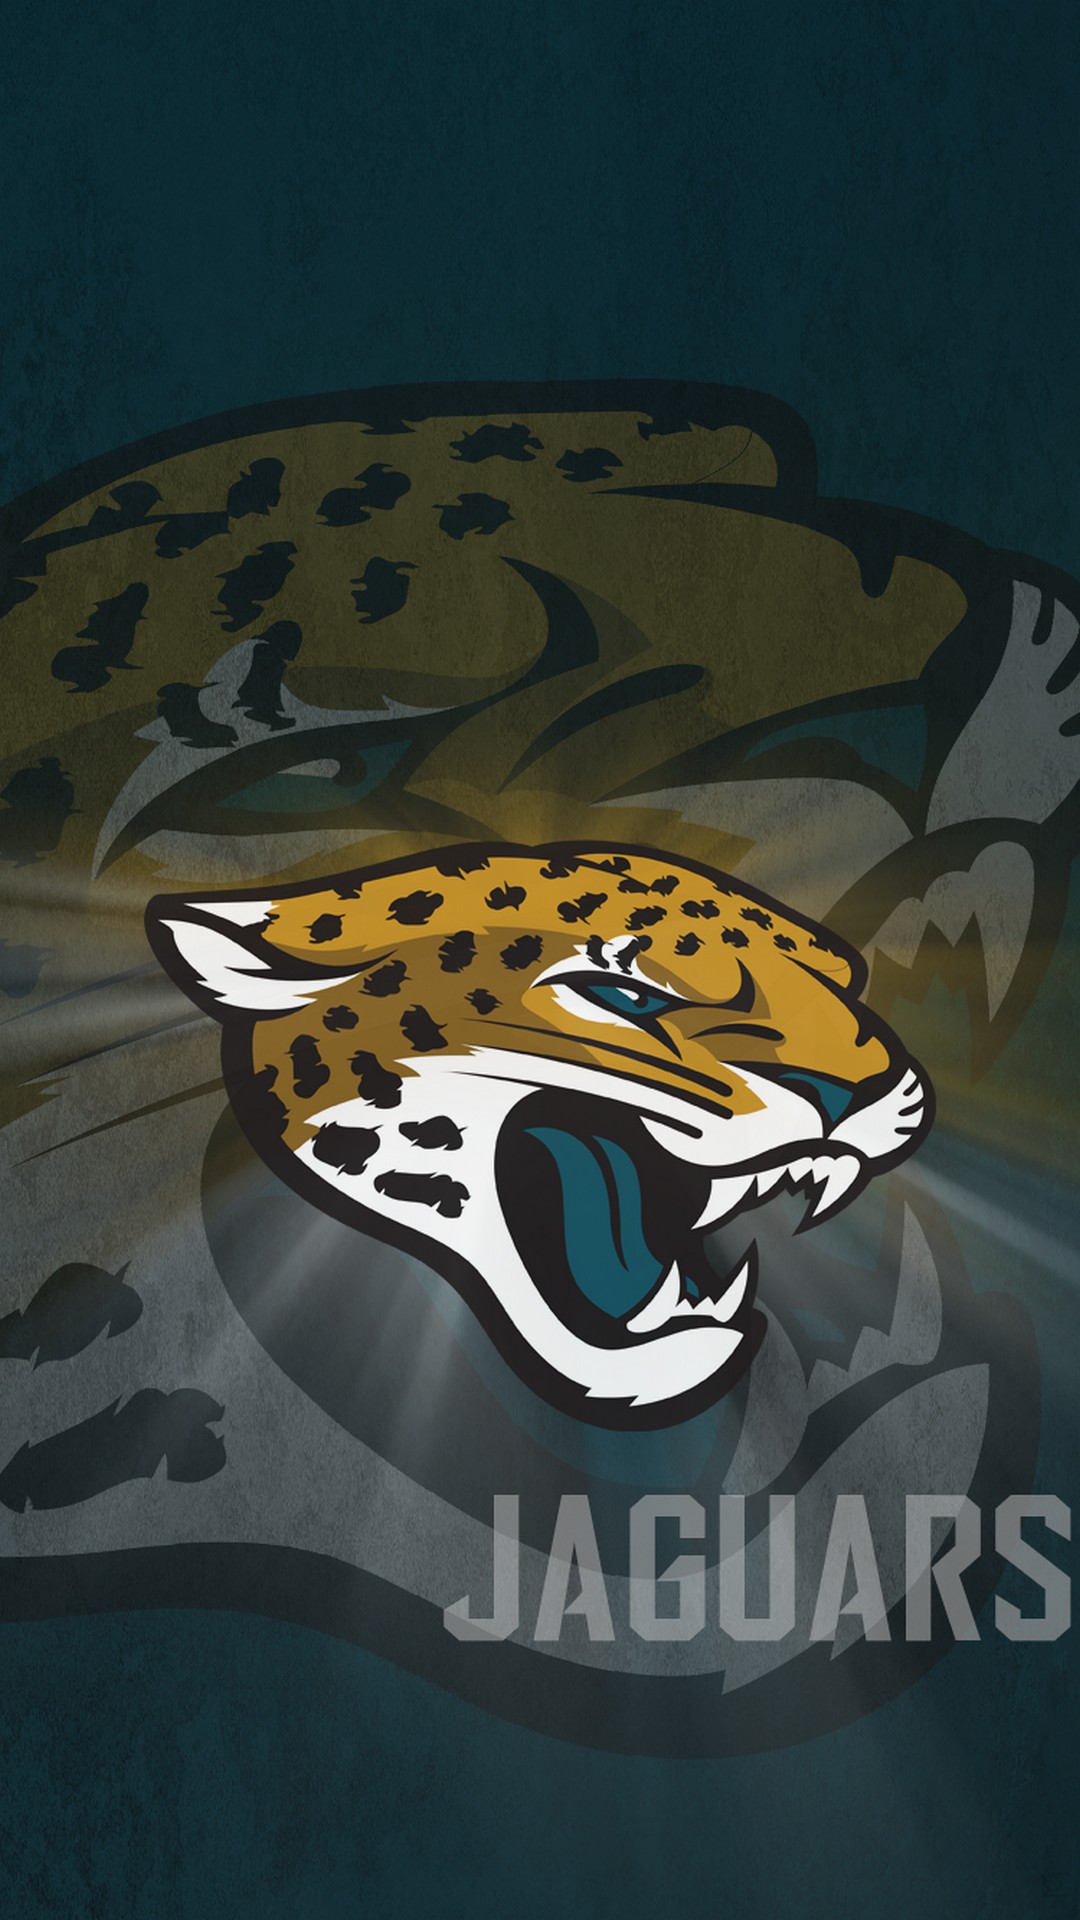 Jacksonville Jaguars iPhone Wallpaper in HD with high-resolution 1080x1920 pixel. Download and set as wallpaper for Desktop Computer, Apple iPhone X, XS Max, XR, 8, 7, 6, SE, iPad, Android